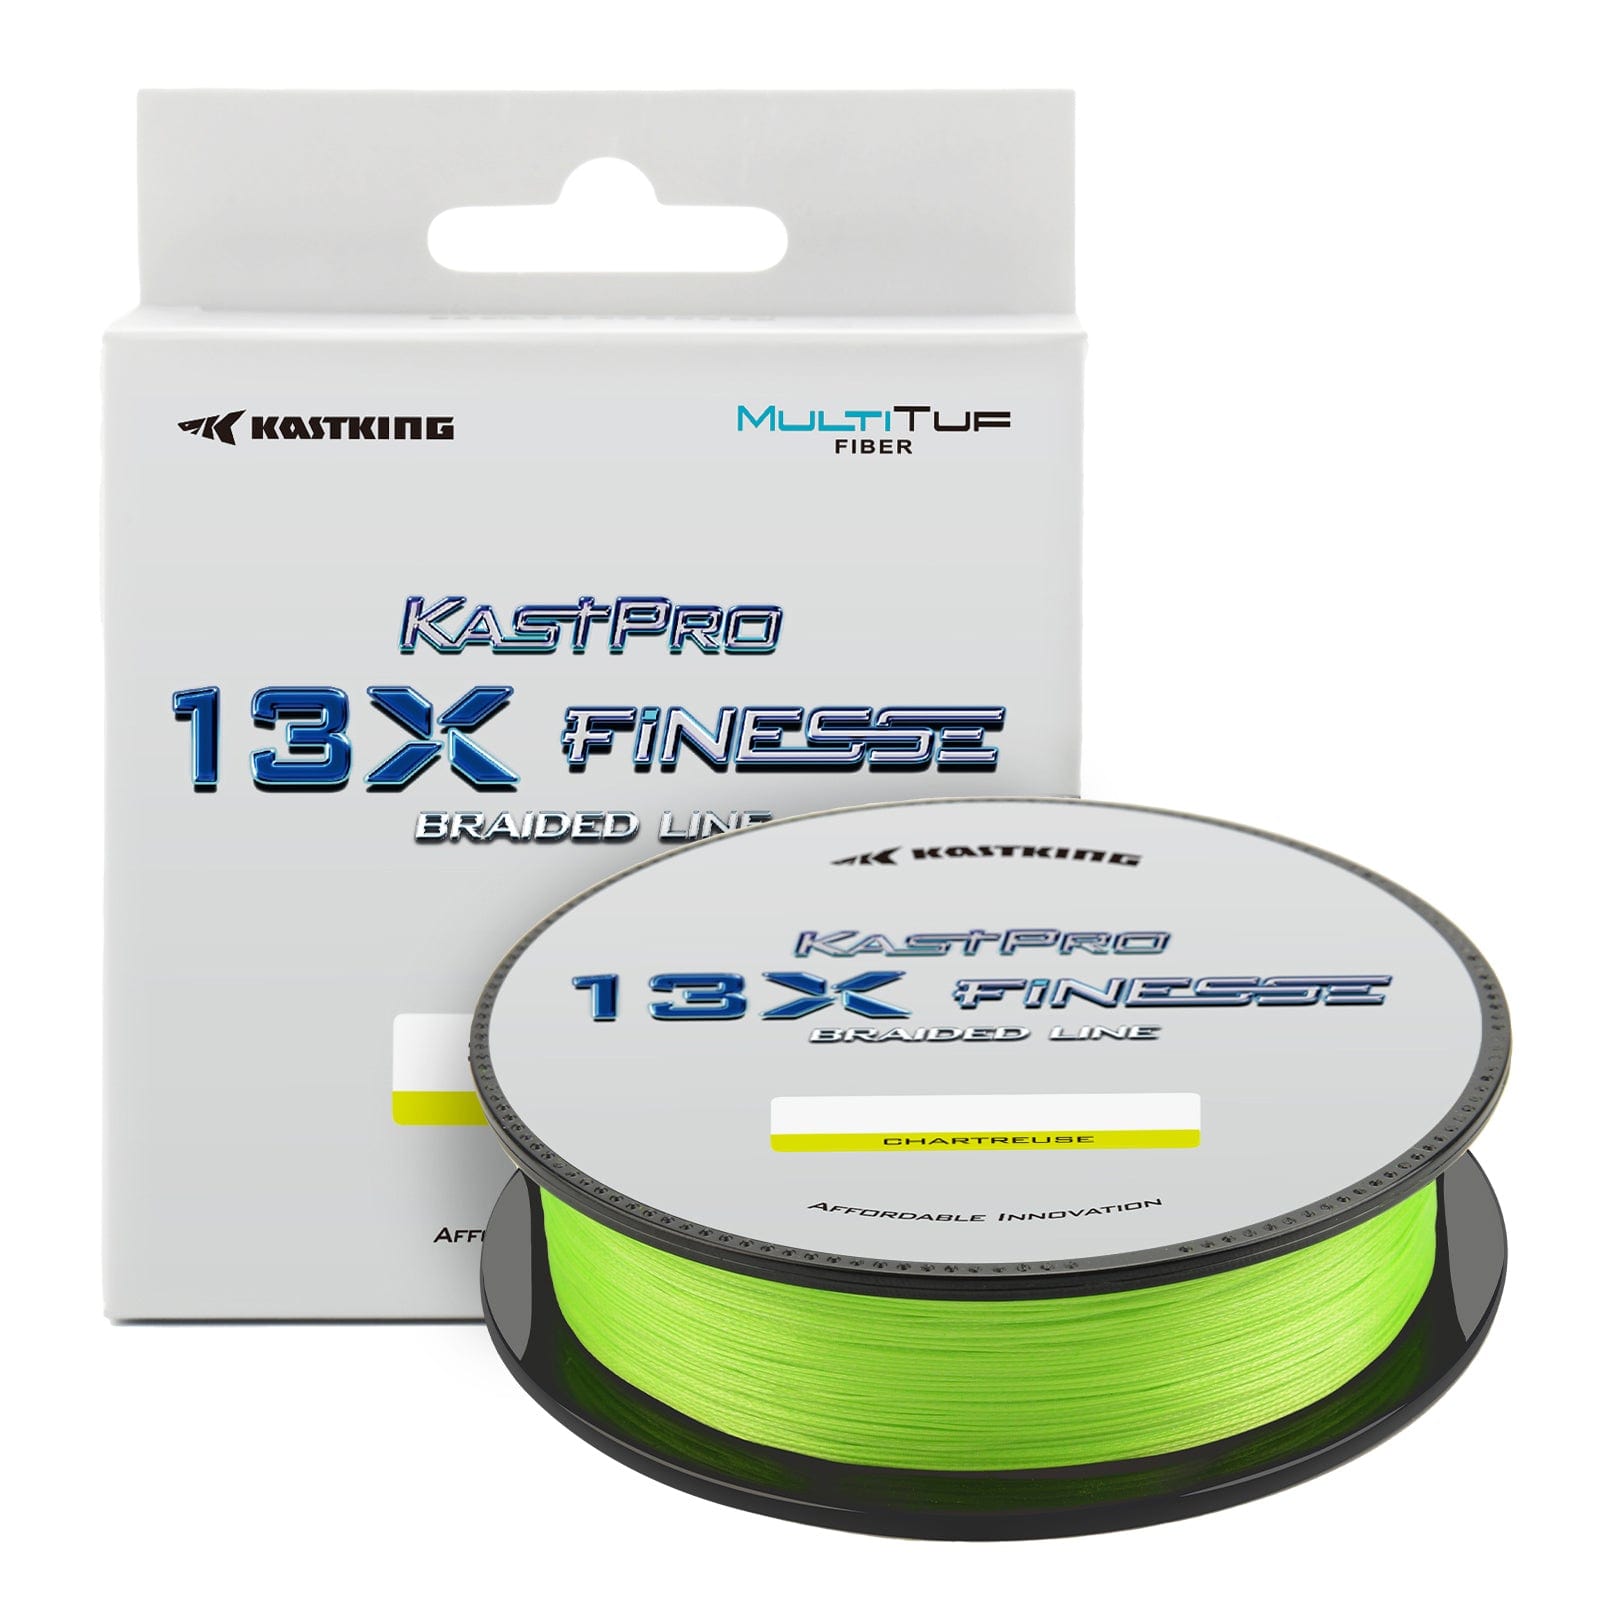  KastKing 13X Finesse Braided Line, Chartreuse,10LB